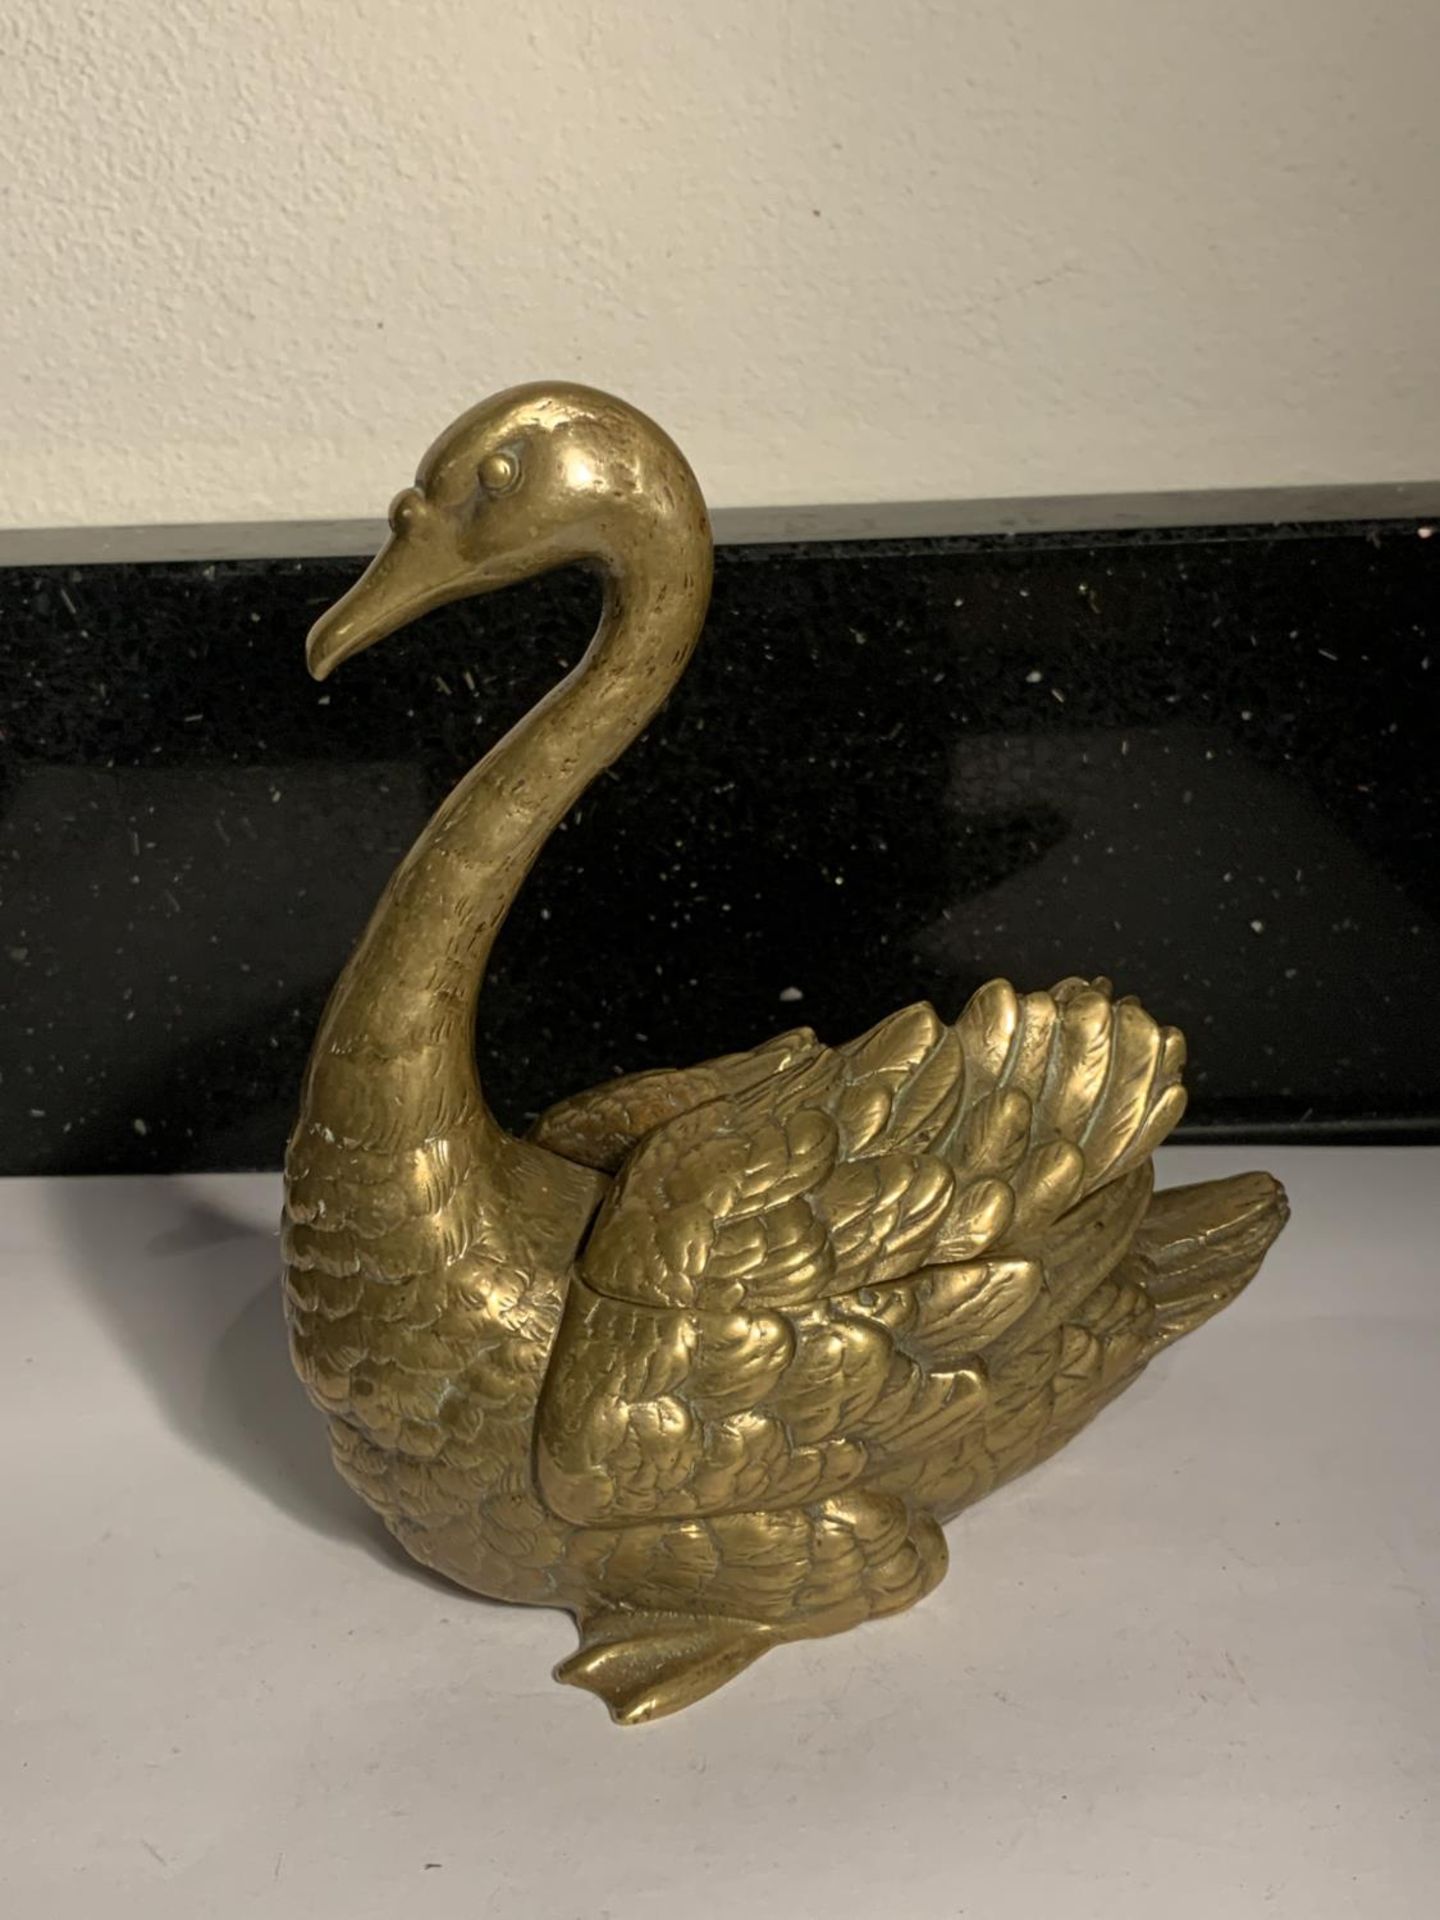 A GERMAN BRASS INKWELL GESCHUTZTN 1101 IN THE STYLE OF A SWAN